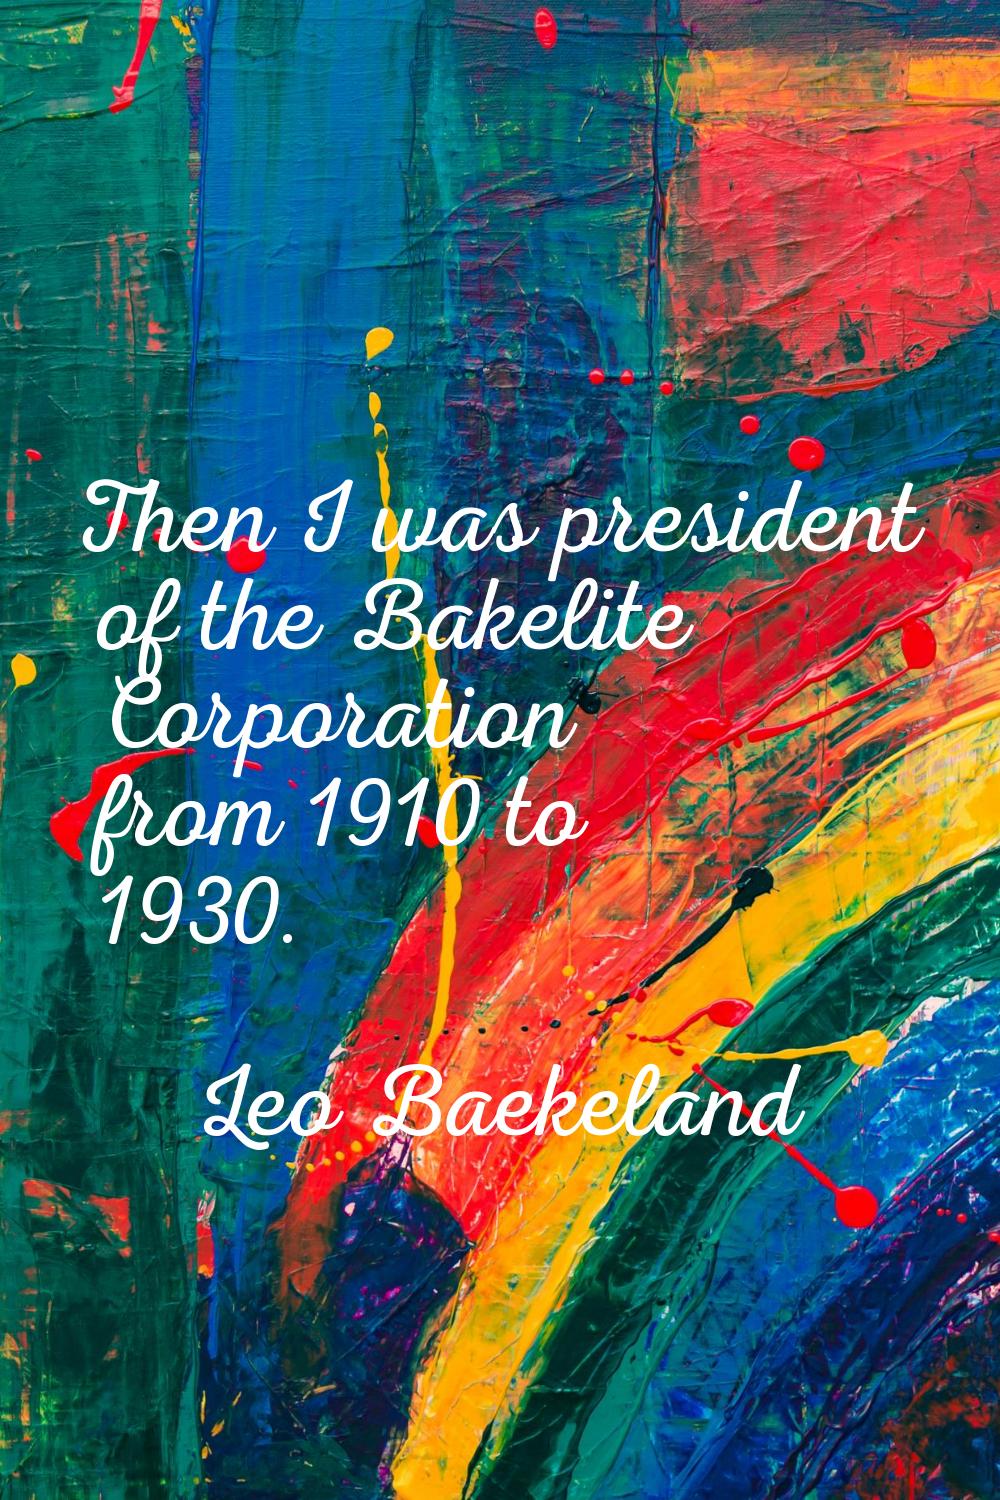 Then I was president of the Bakelite Corporation from 1910 to 1930.